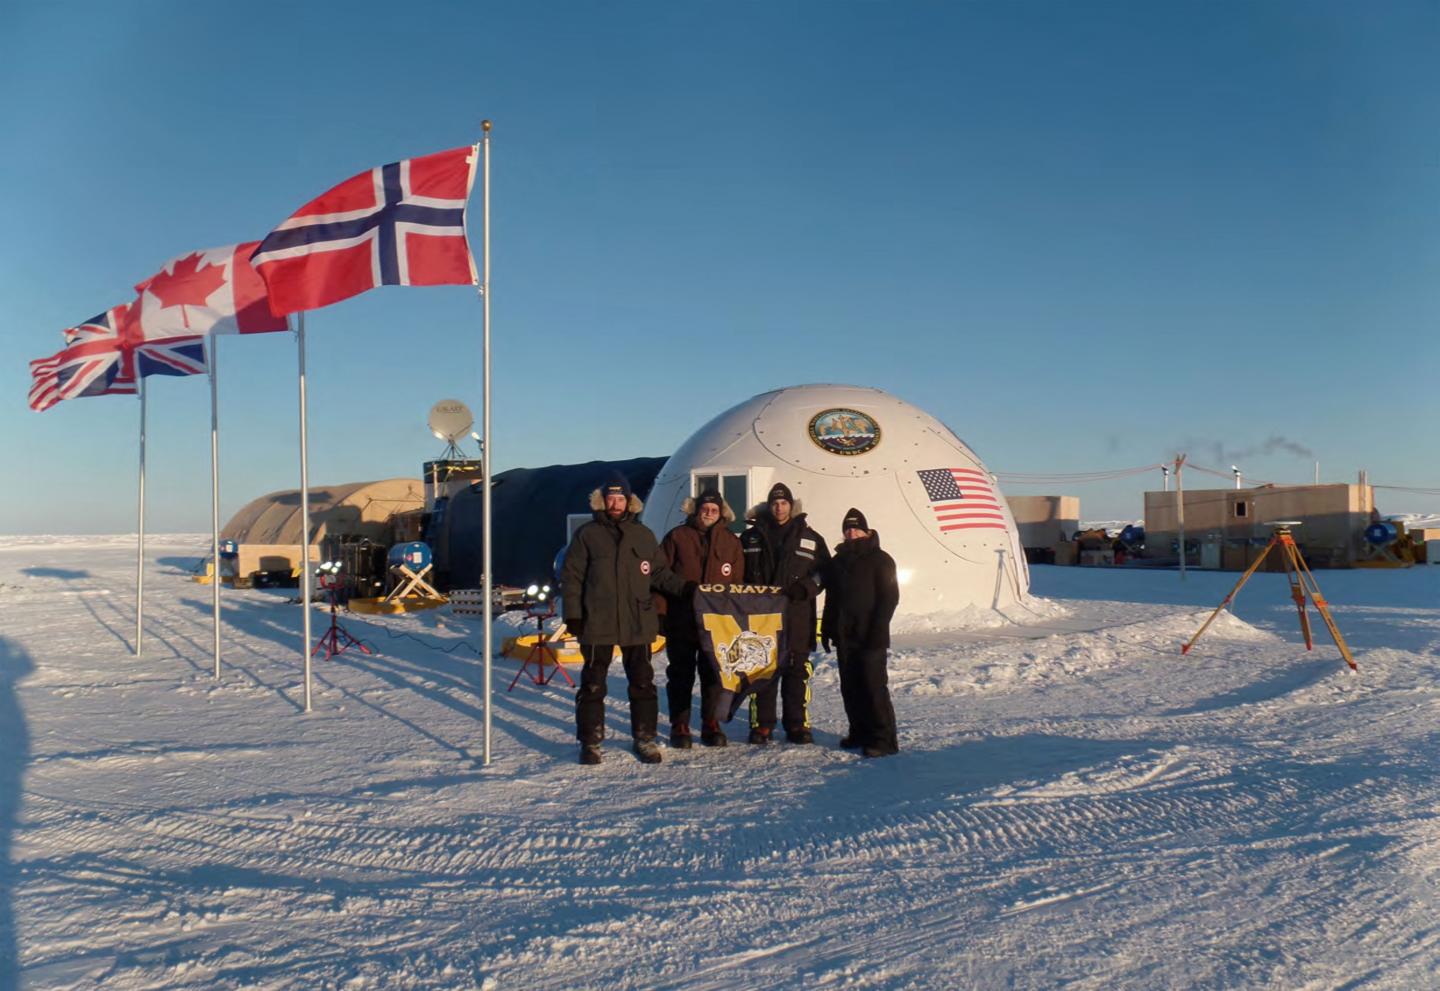 NRL ICEX2016 Expedition, March 2016